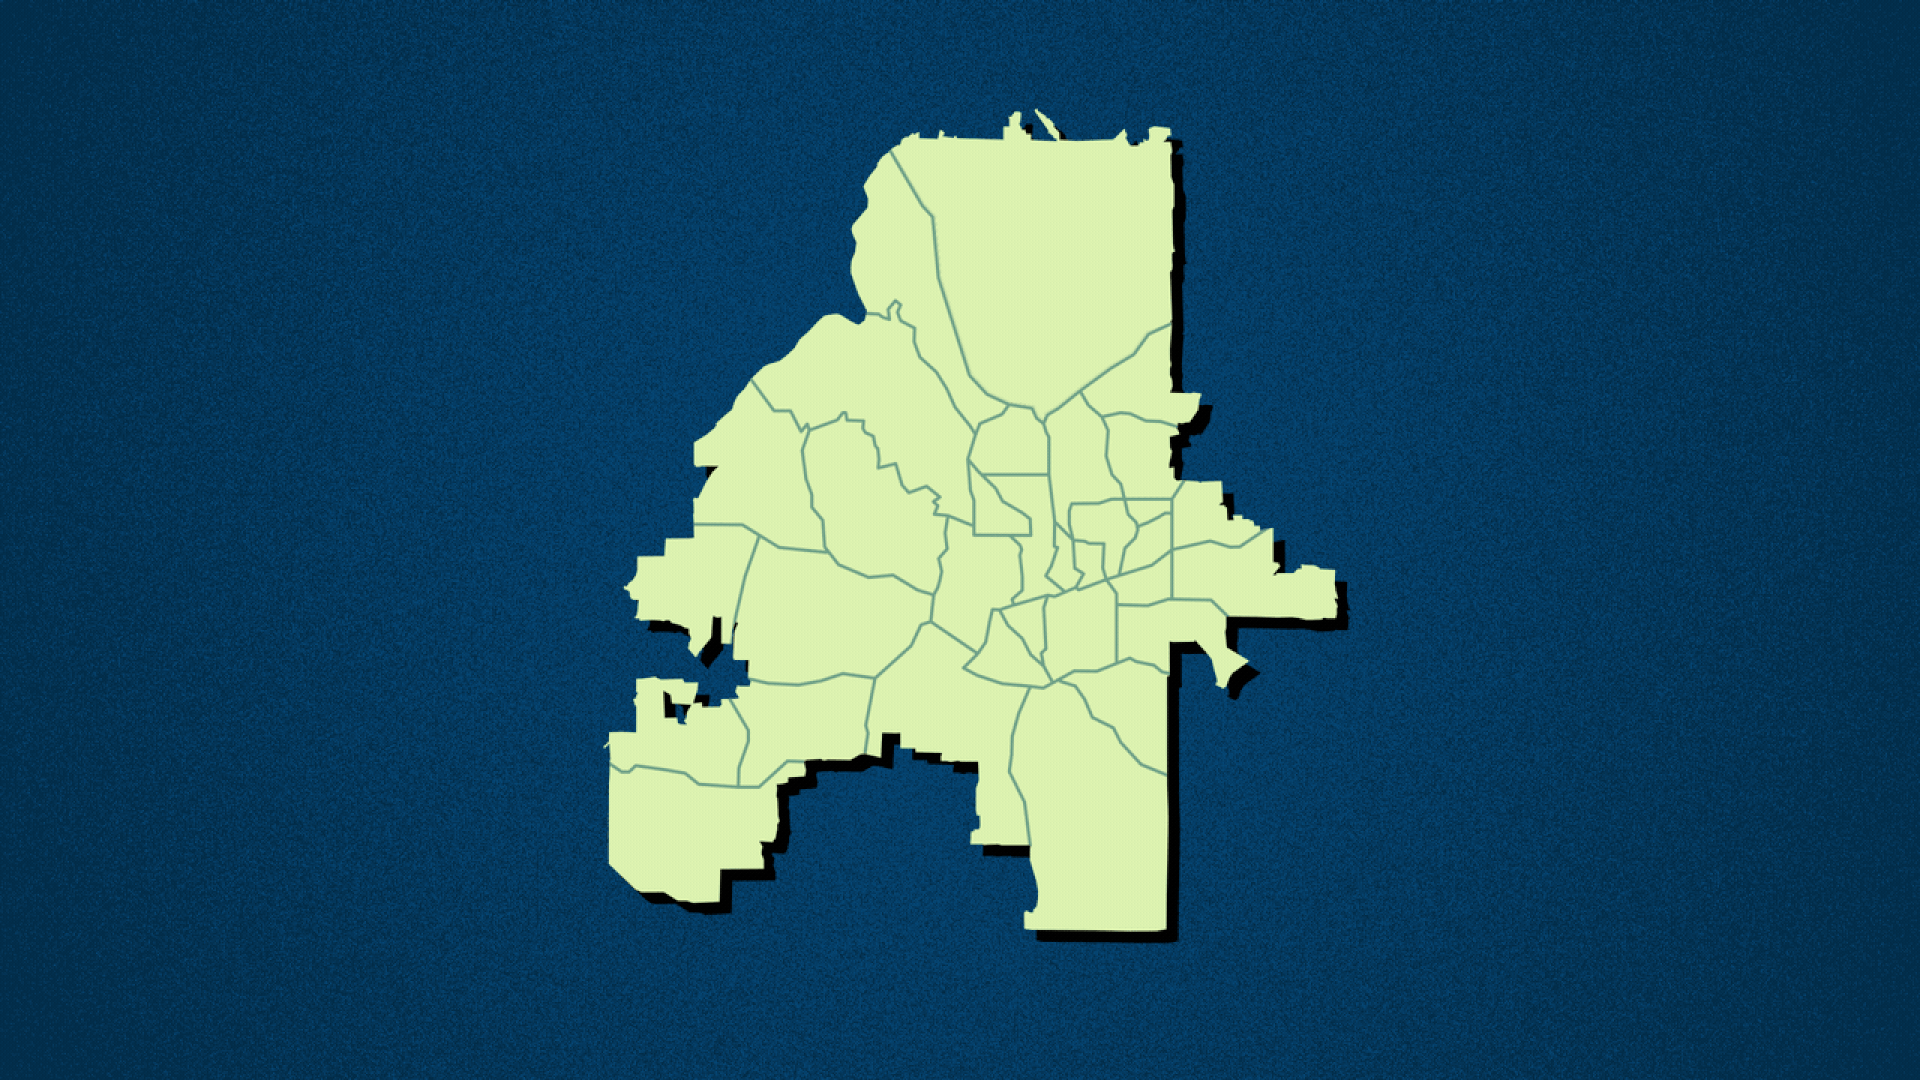 An interactive map depicting of the neighborhood of Buckhead splitting off from the city of Atlanta